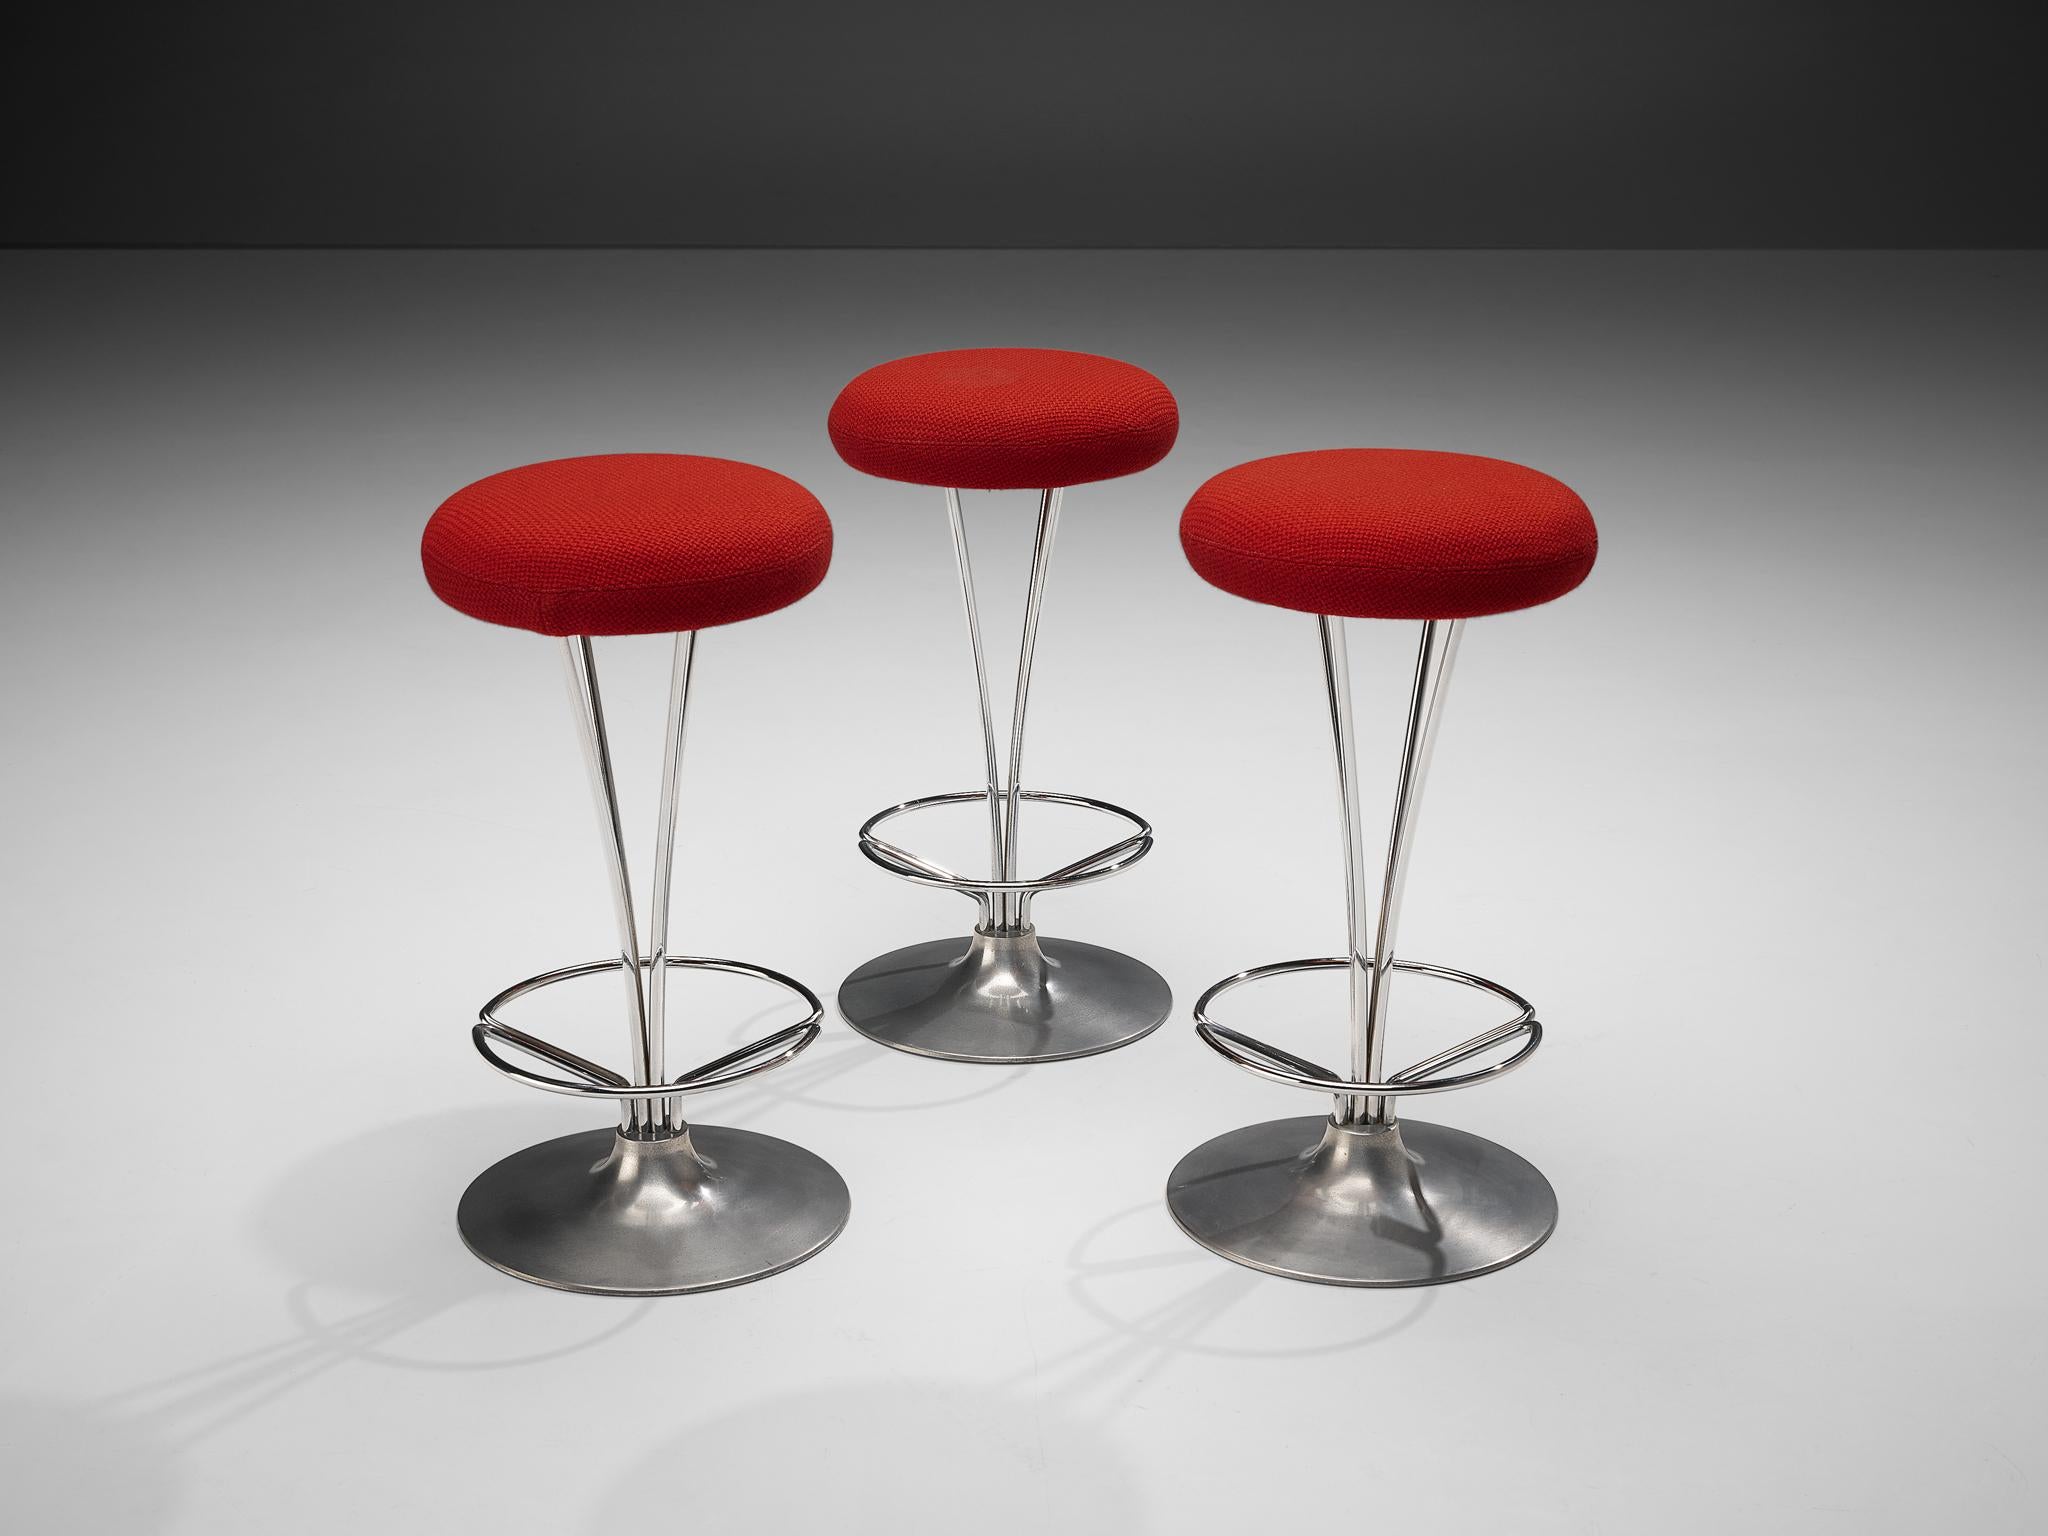 Piet Hein for Fritz Hansen, set of three bar stools, metal, red fabric upholstery, Denmark, 1970s
 
Set of three bar stools designed by Piet Hein for Fritz Hansen. These stools hold an excellent mix of materials, creating a nice contrast between the